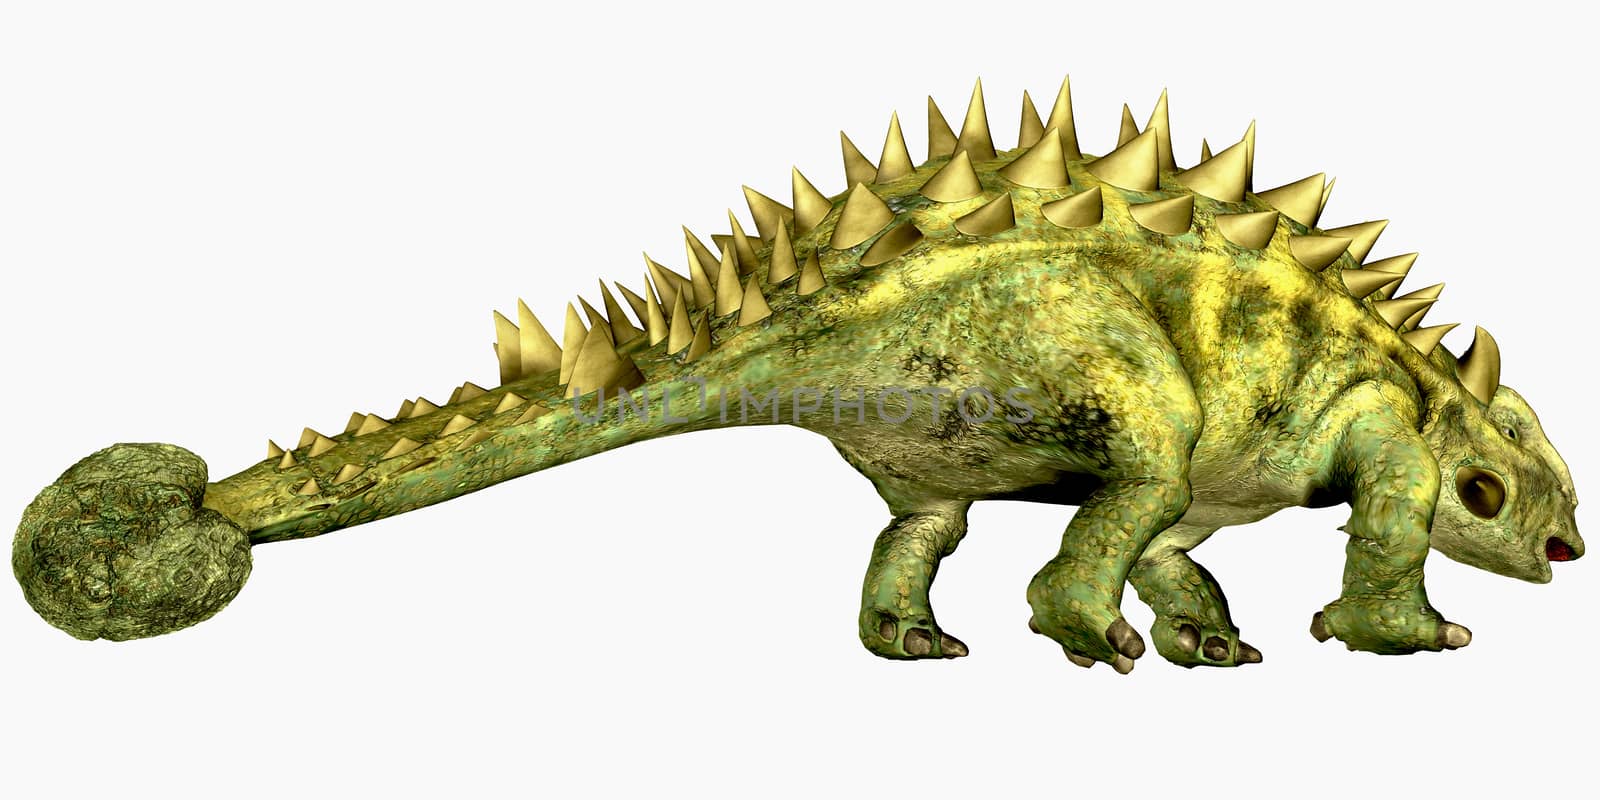 Talarurus was a herbivorous dinosaur with a club tail that lived in the Cretaceous Period of Mongolia.